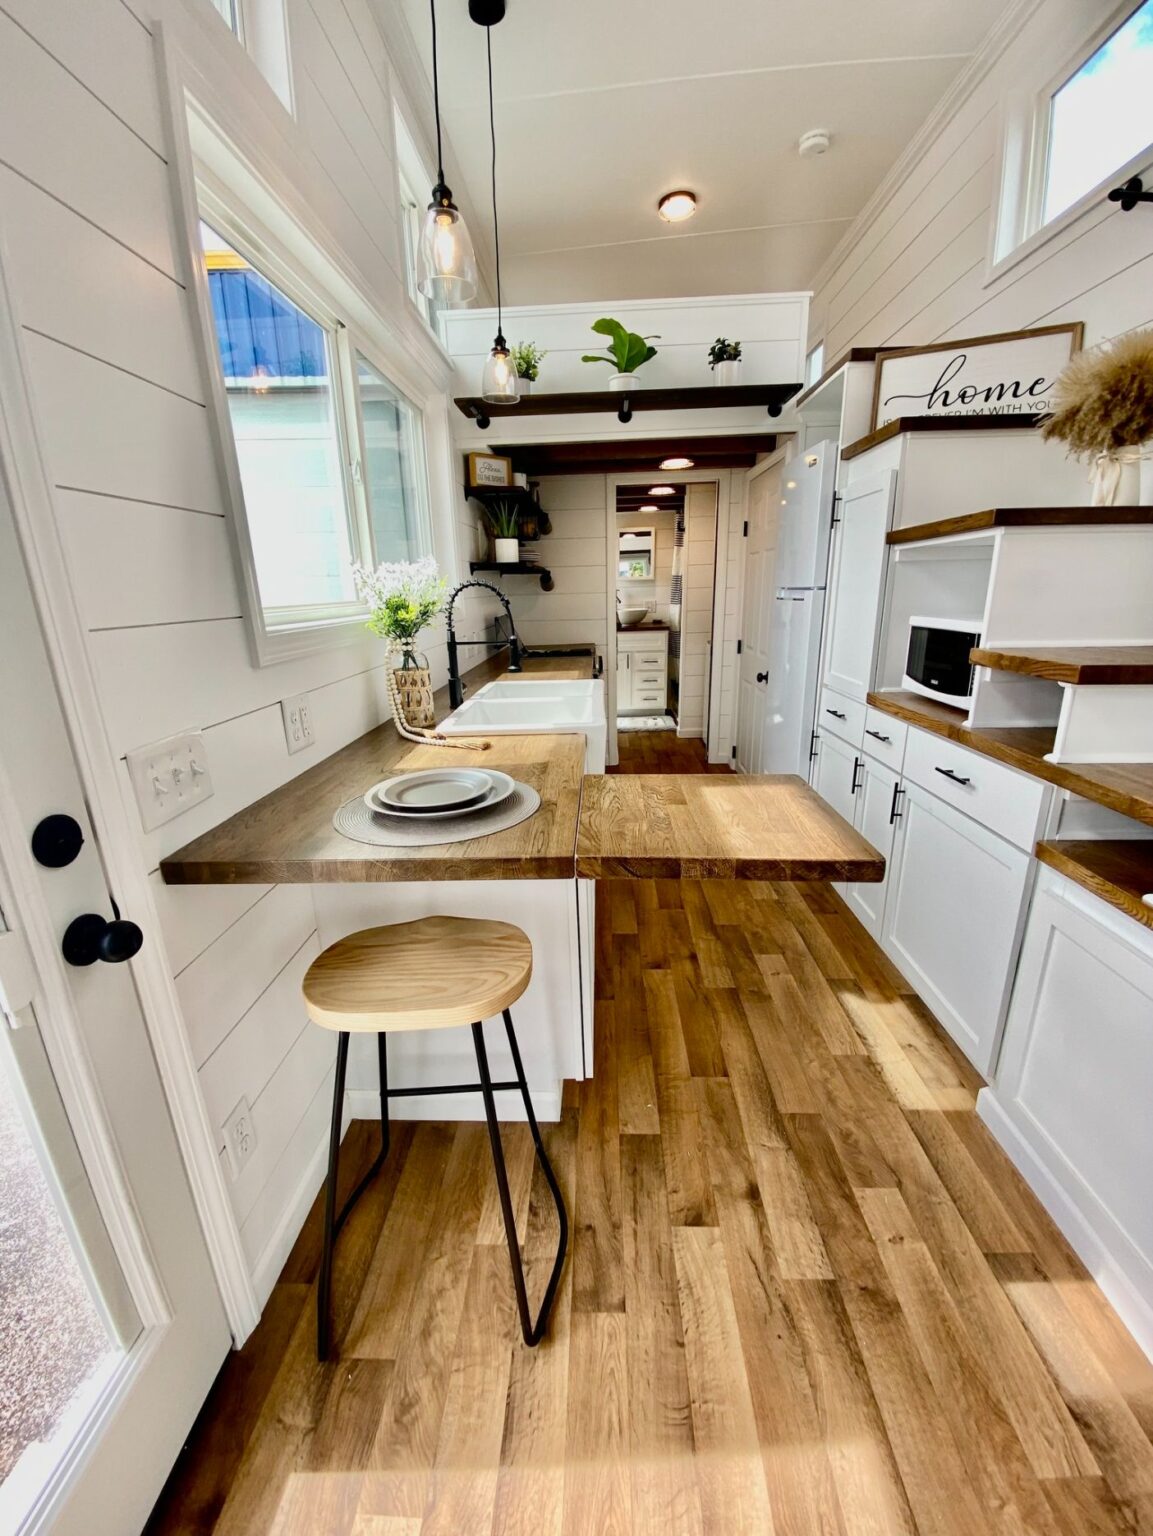 The Rebekah Tiny Home Offers All the Amenities of a Traditional House ...